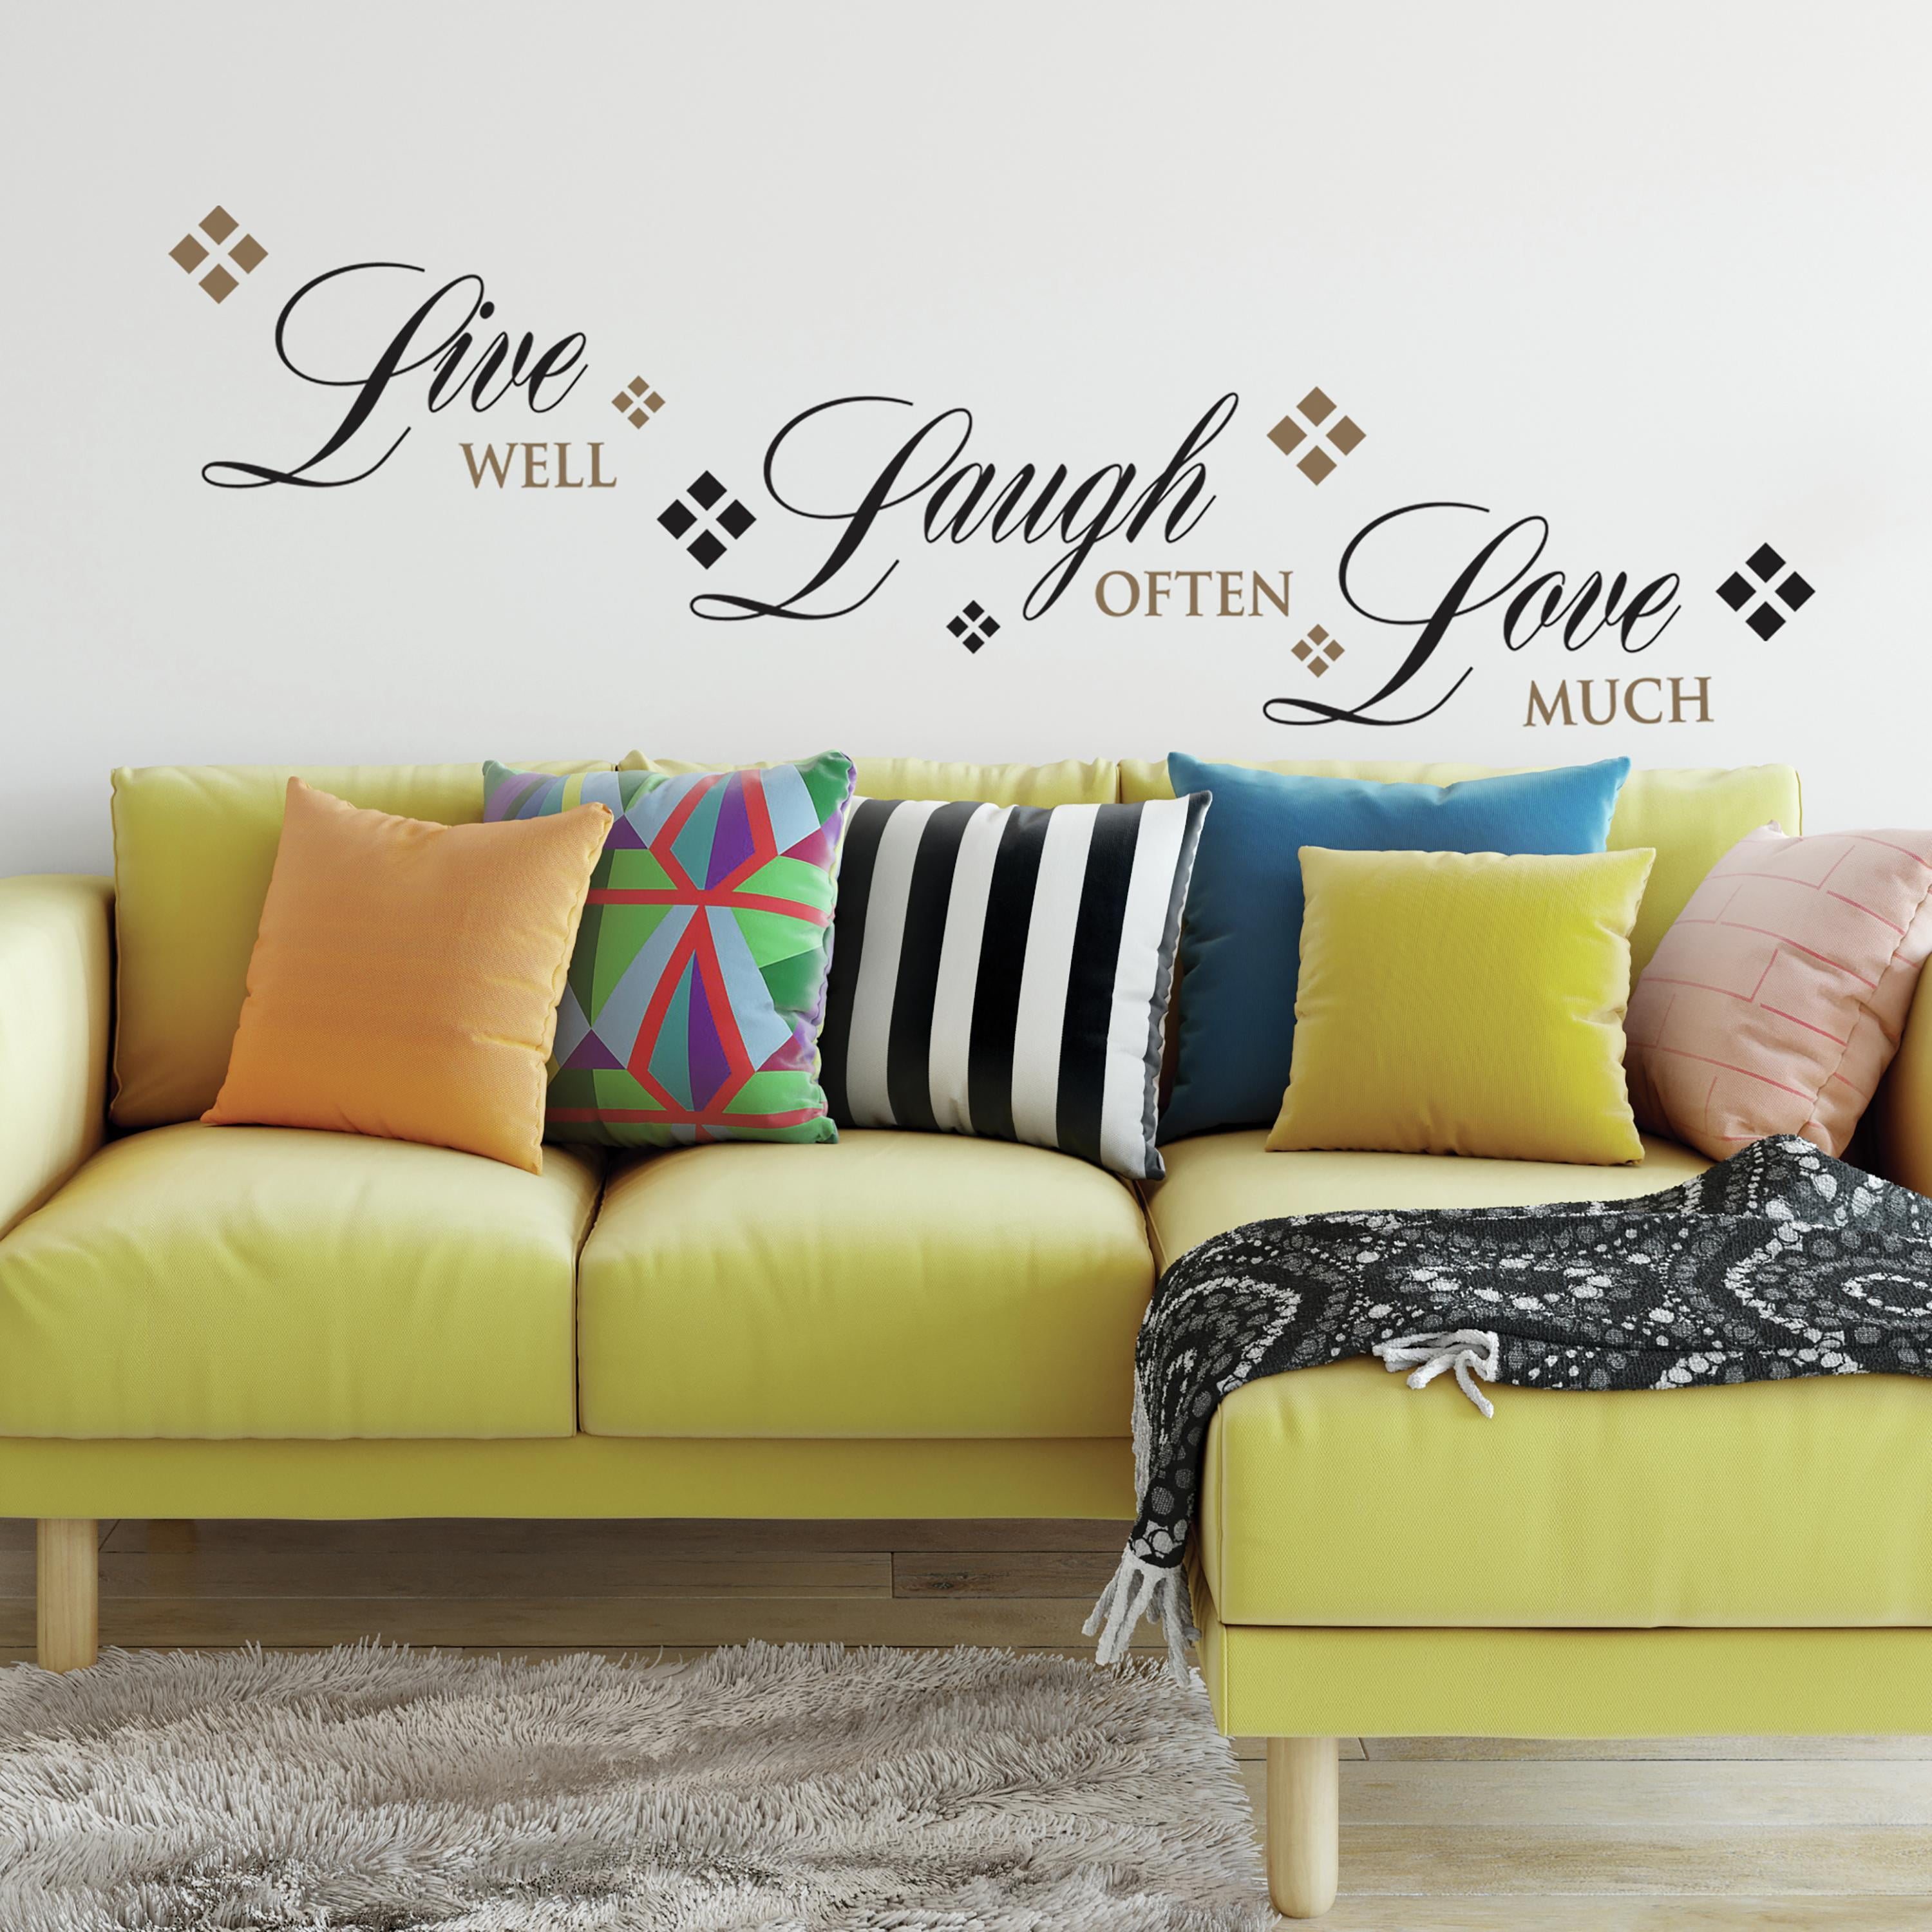 Bless This Home with Love and Laughter Wall Decals Stickers Vinyl Wall Quotes Peel and Stick Home Saying Living Room House Entryway Decor Gift